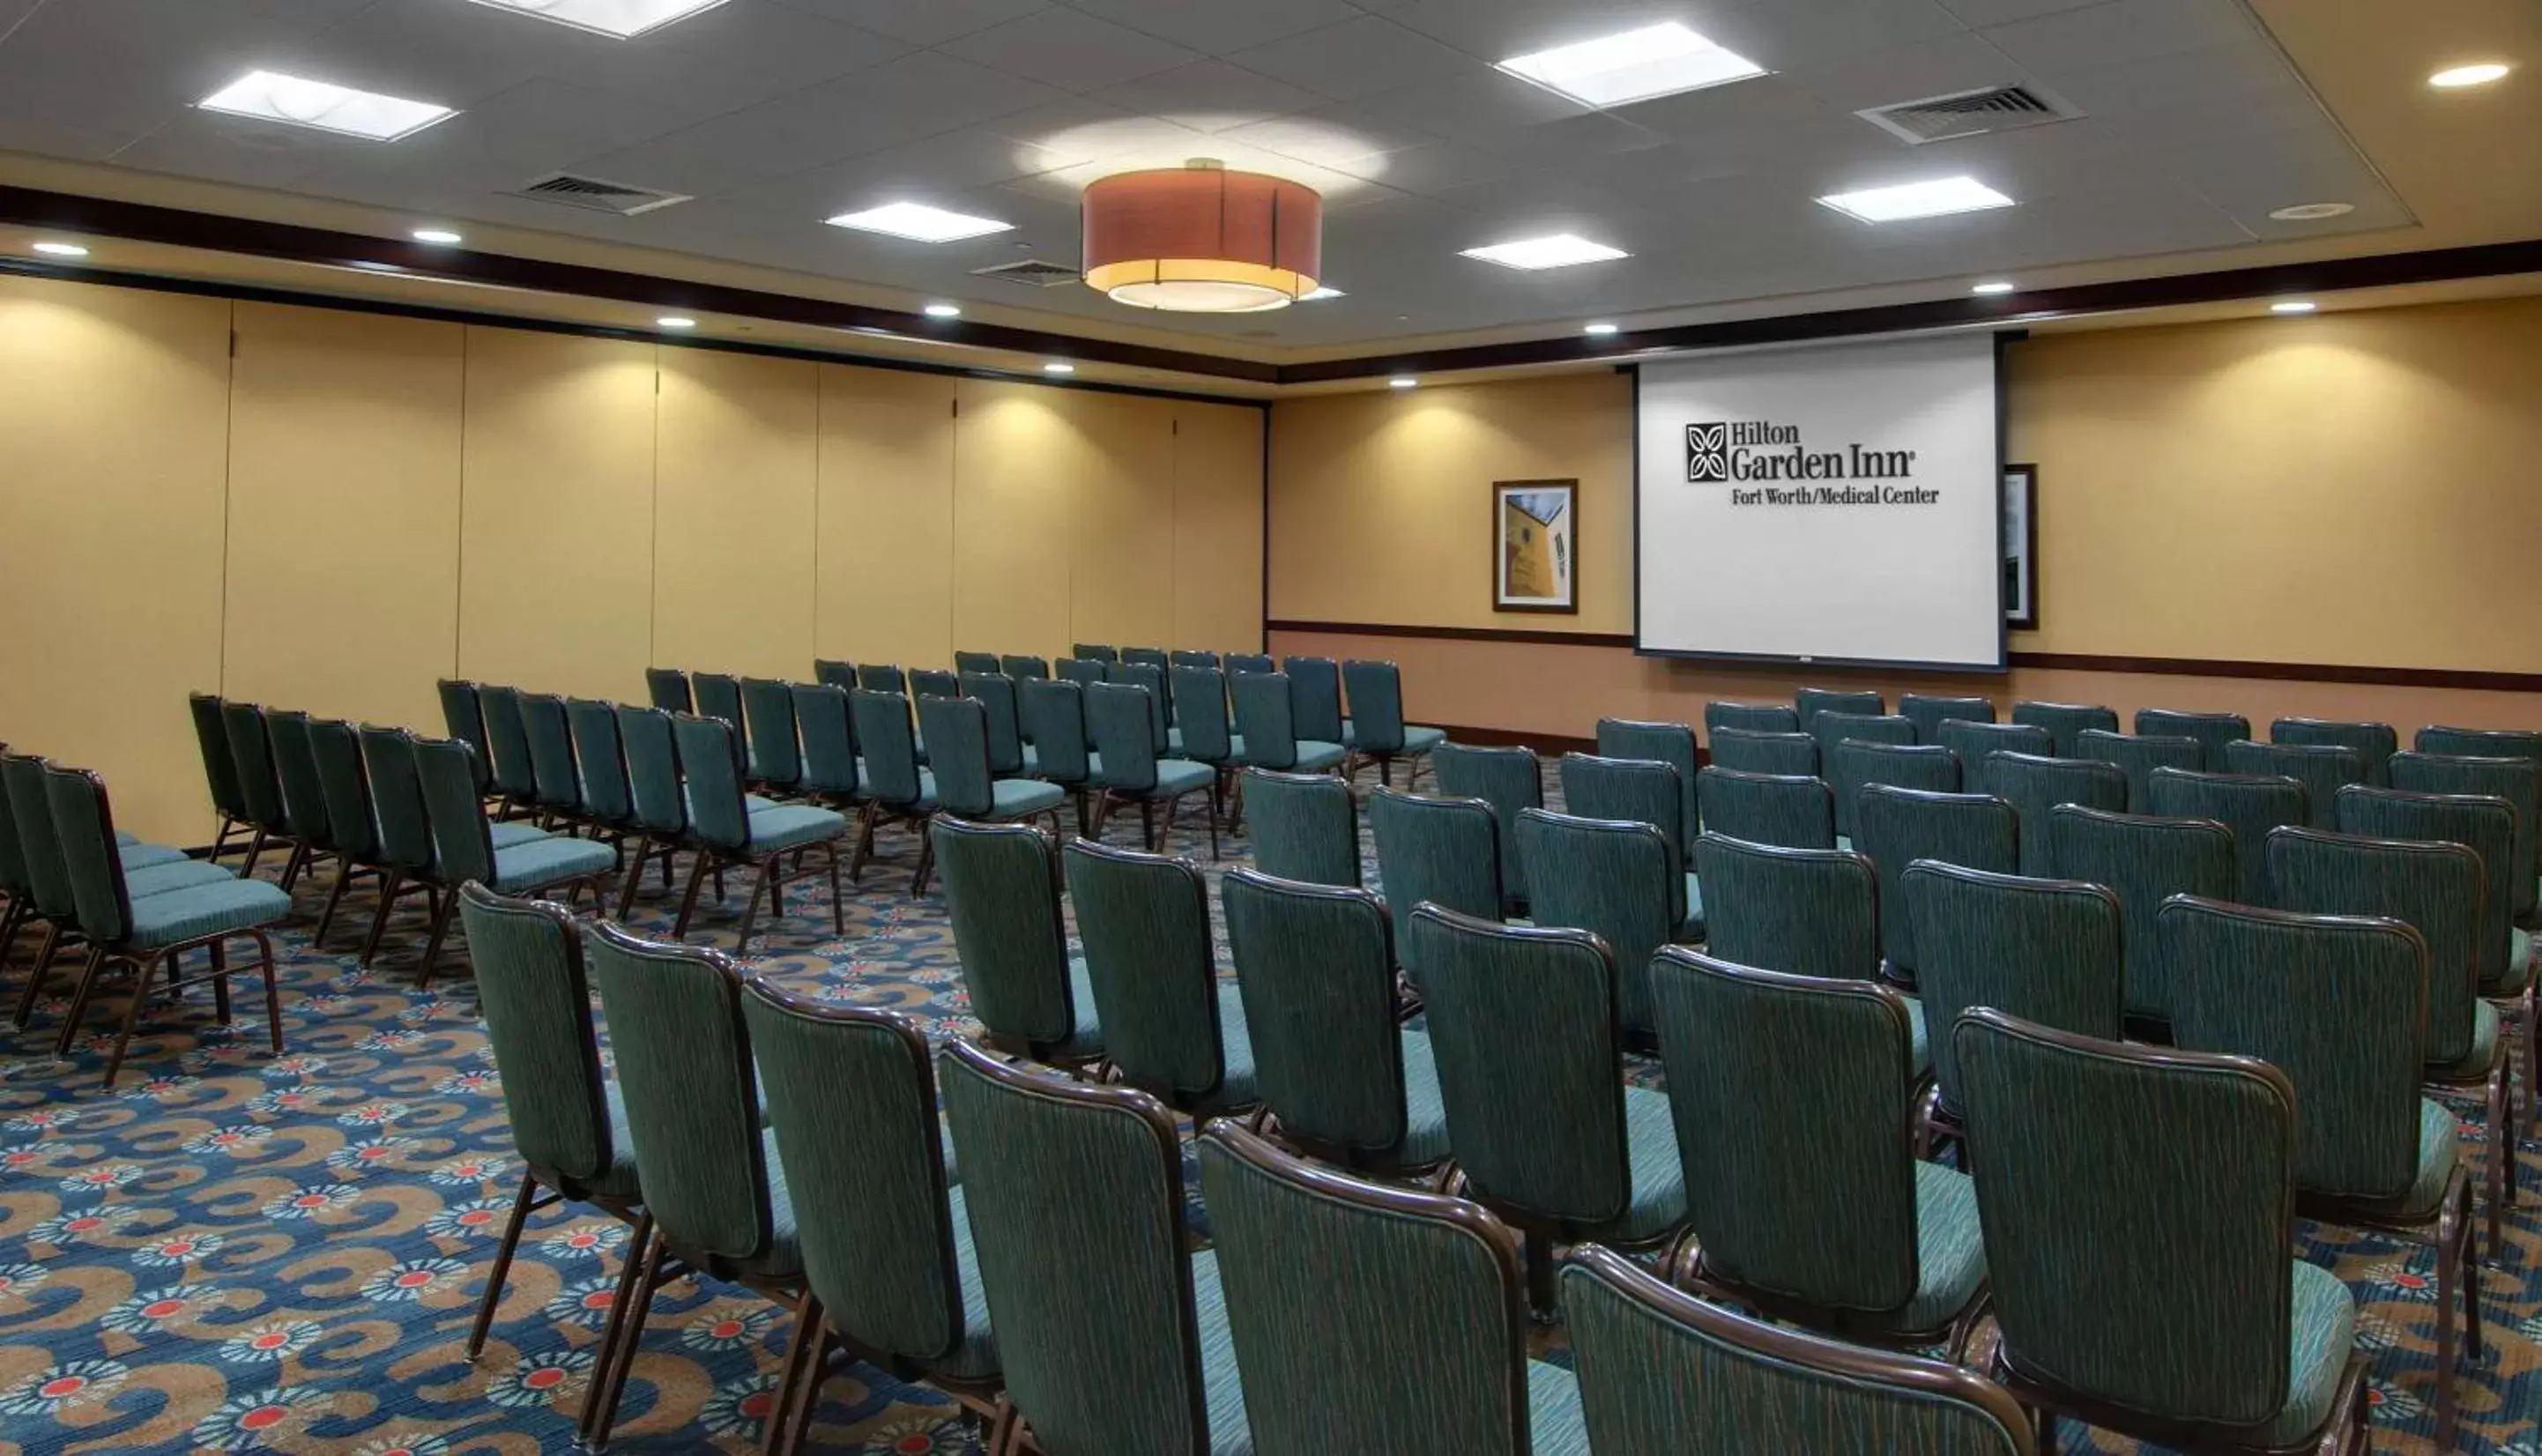 Meeting/conference room in Hilton Garden Inn Fort Worth Medical Center